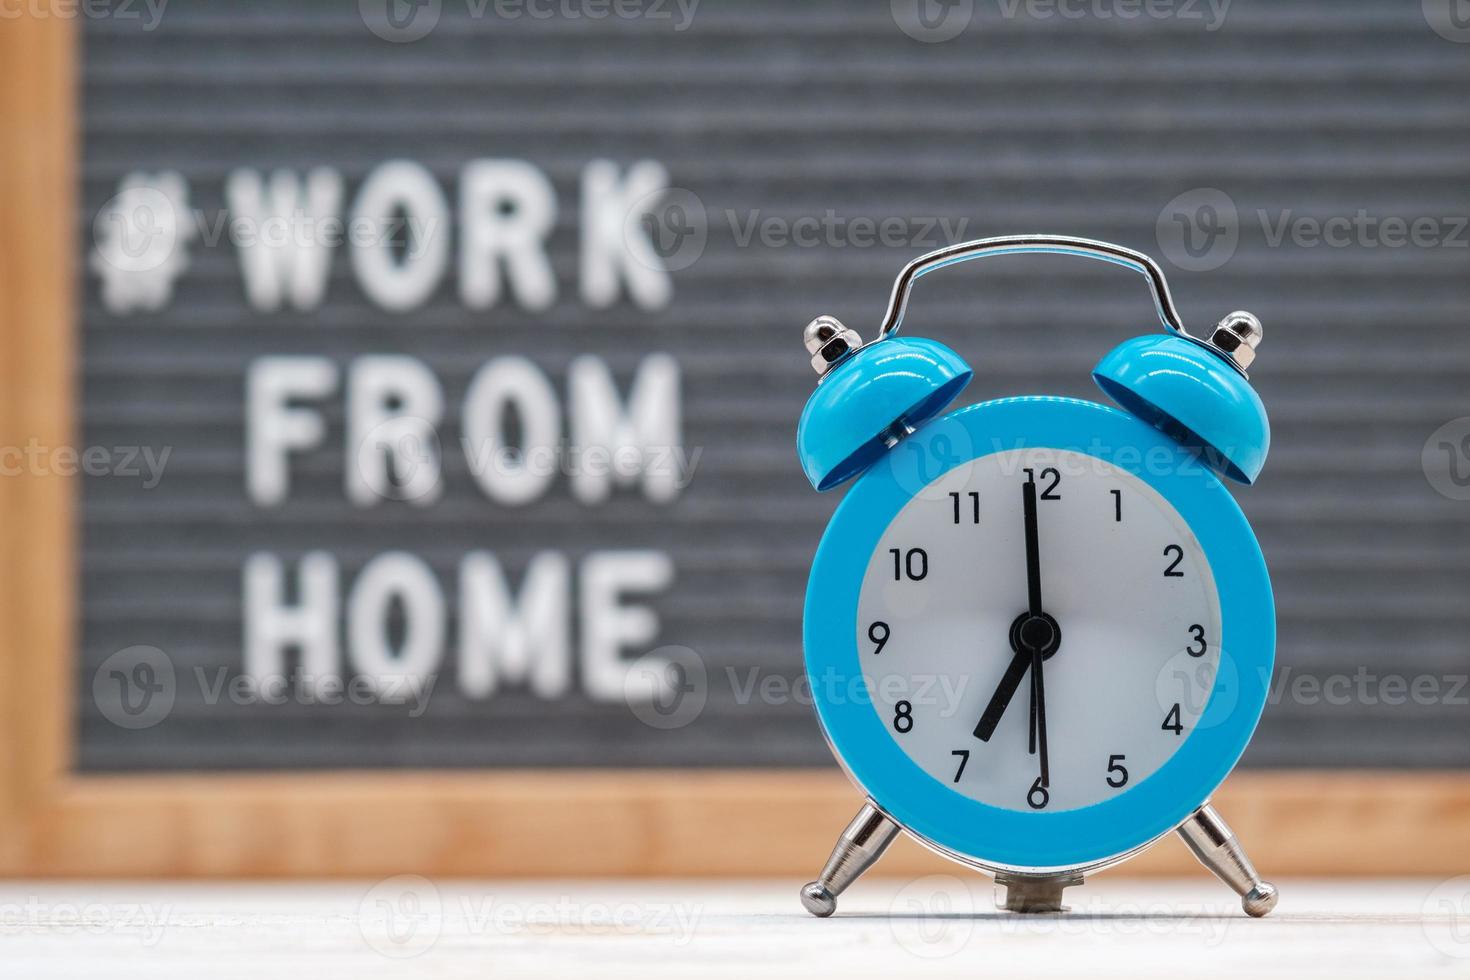 Vintage alarm clock on the background of english text that says work from home photo